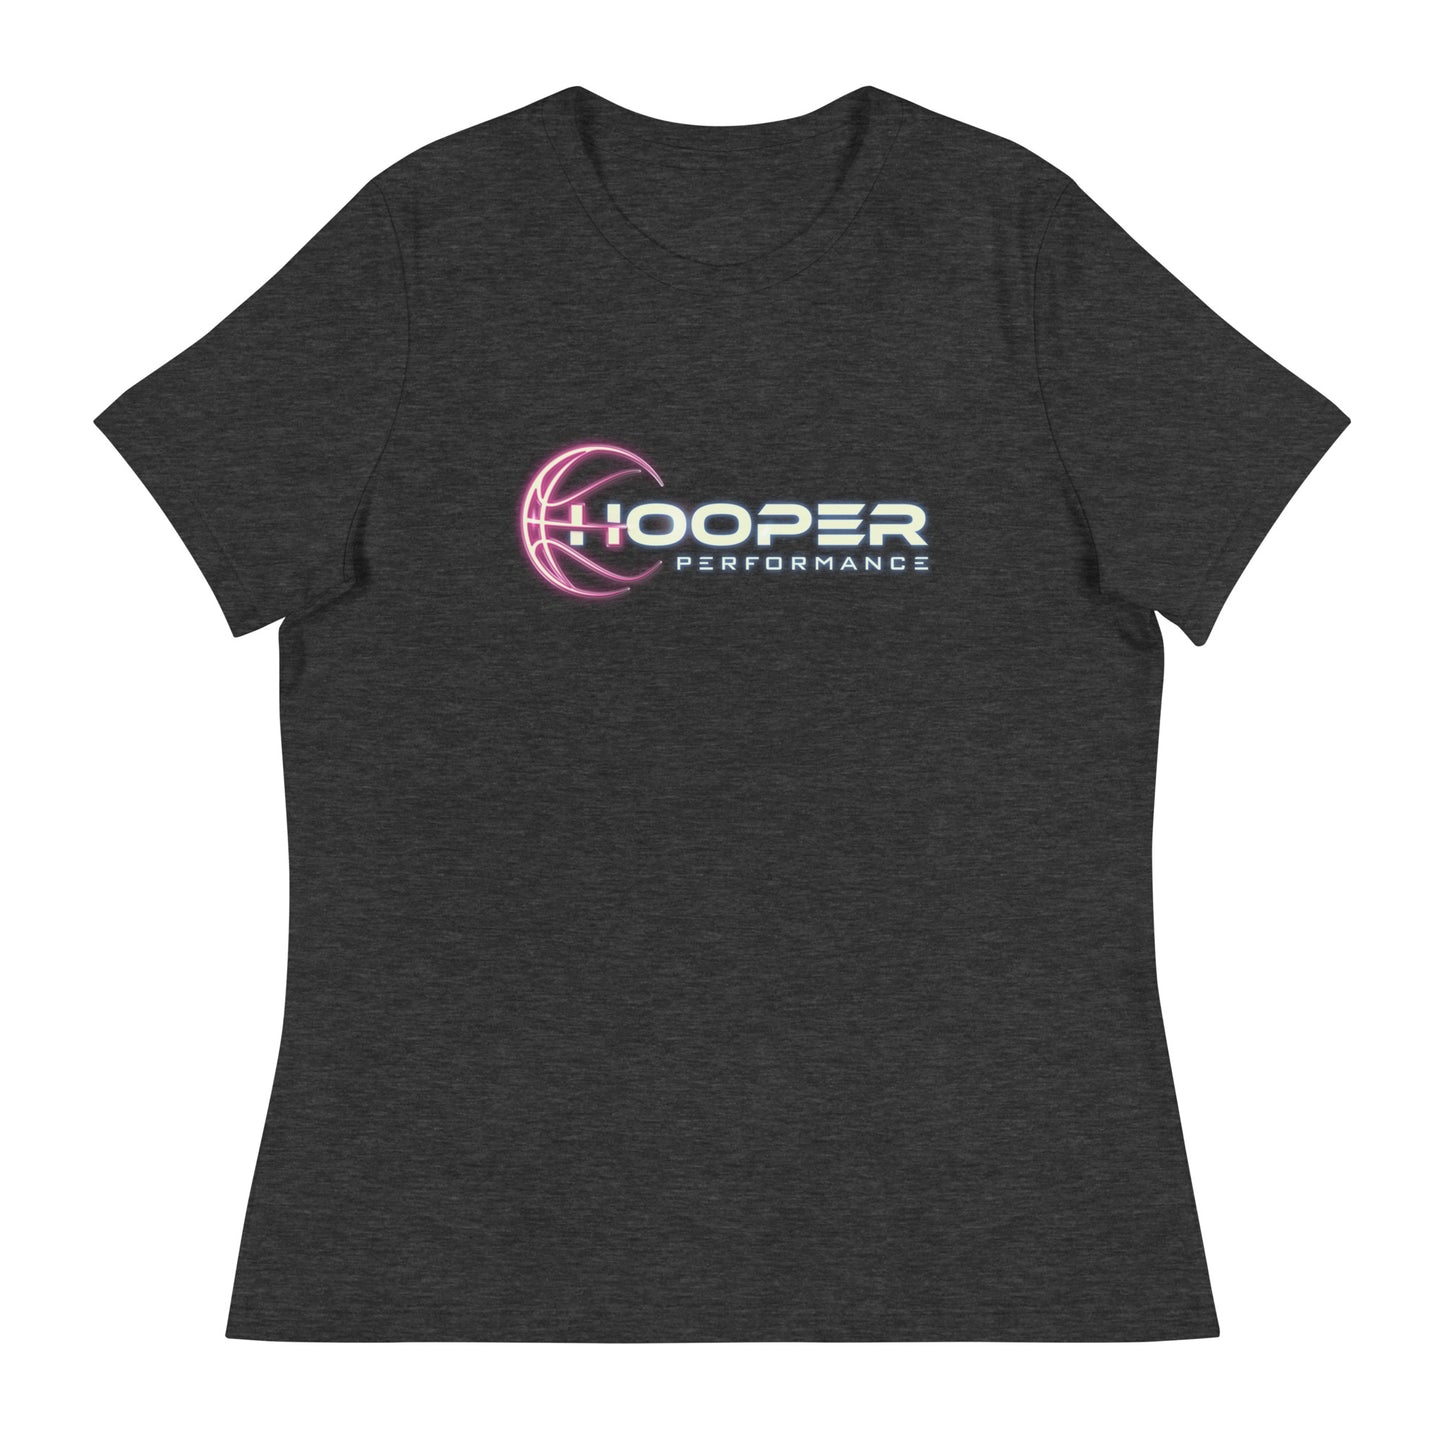 Hooper Performance pink color Women's Relaxed T-Shirt-Comfortable & Stylish for Women